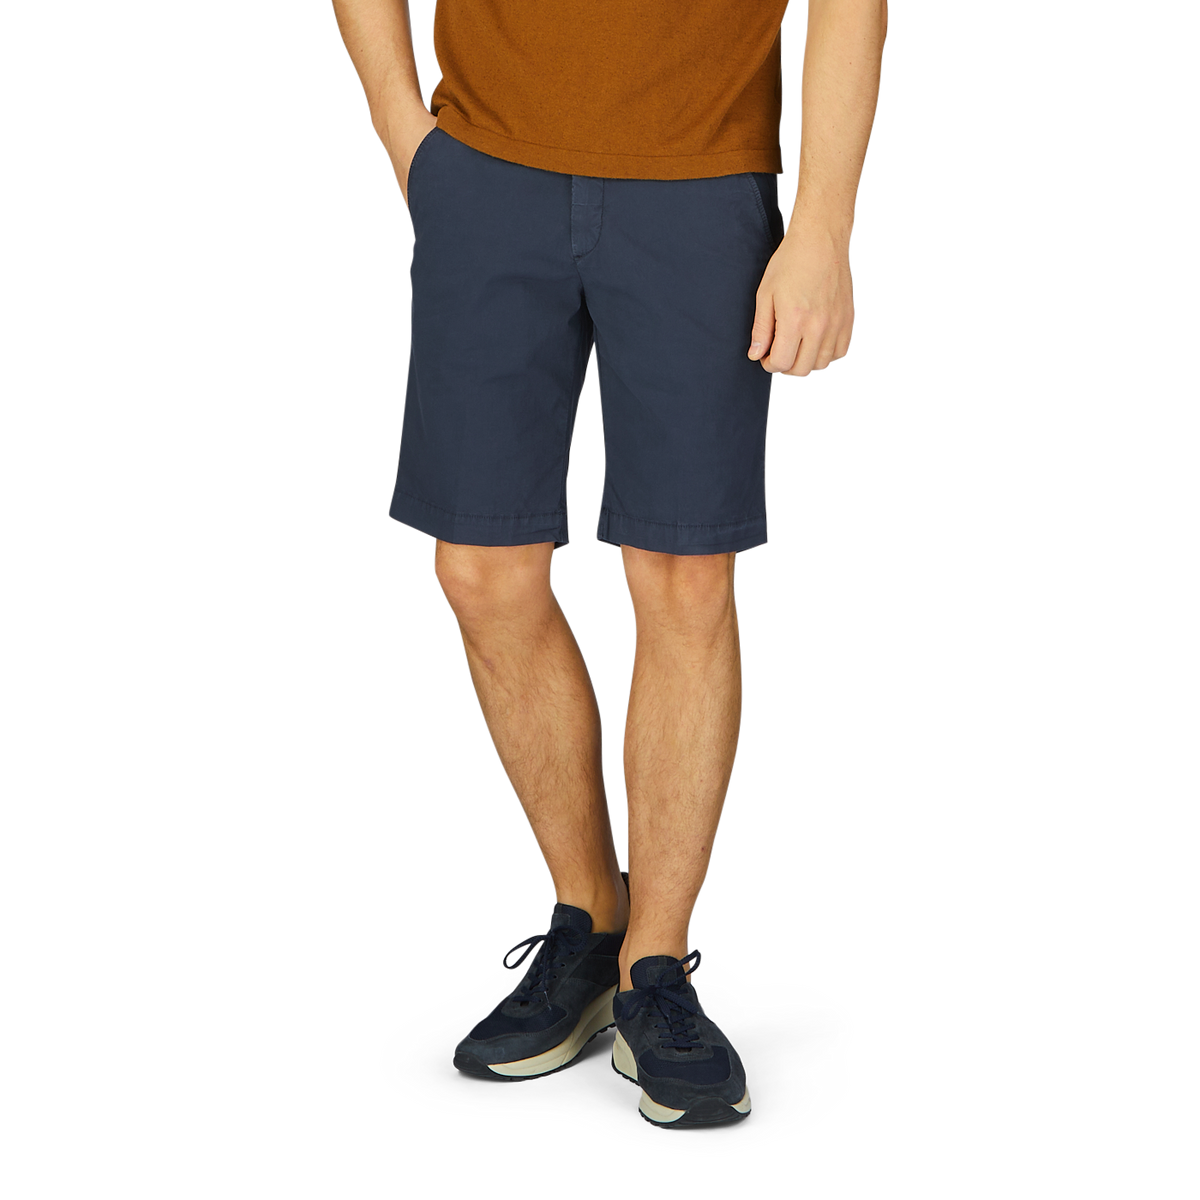 Man standing in Navy Blue Cotton Drawstring Malibu Shorts with an adjustable waistband from Briglia and sneakers.